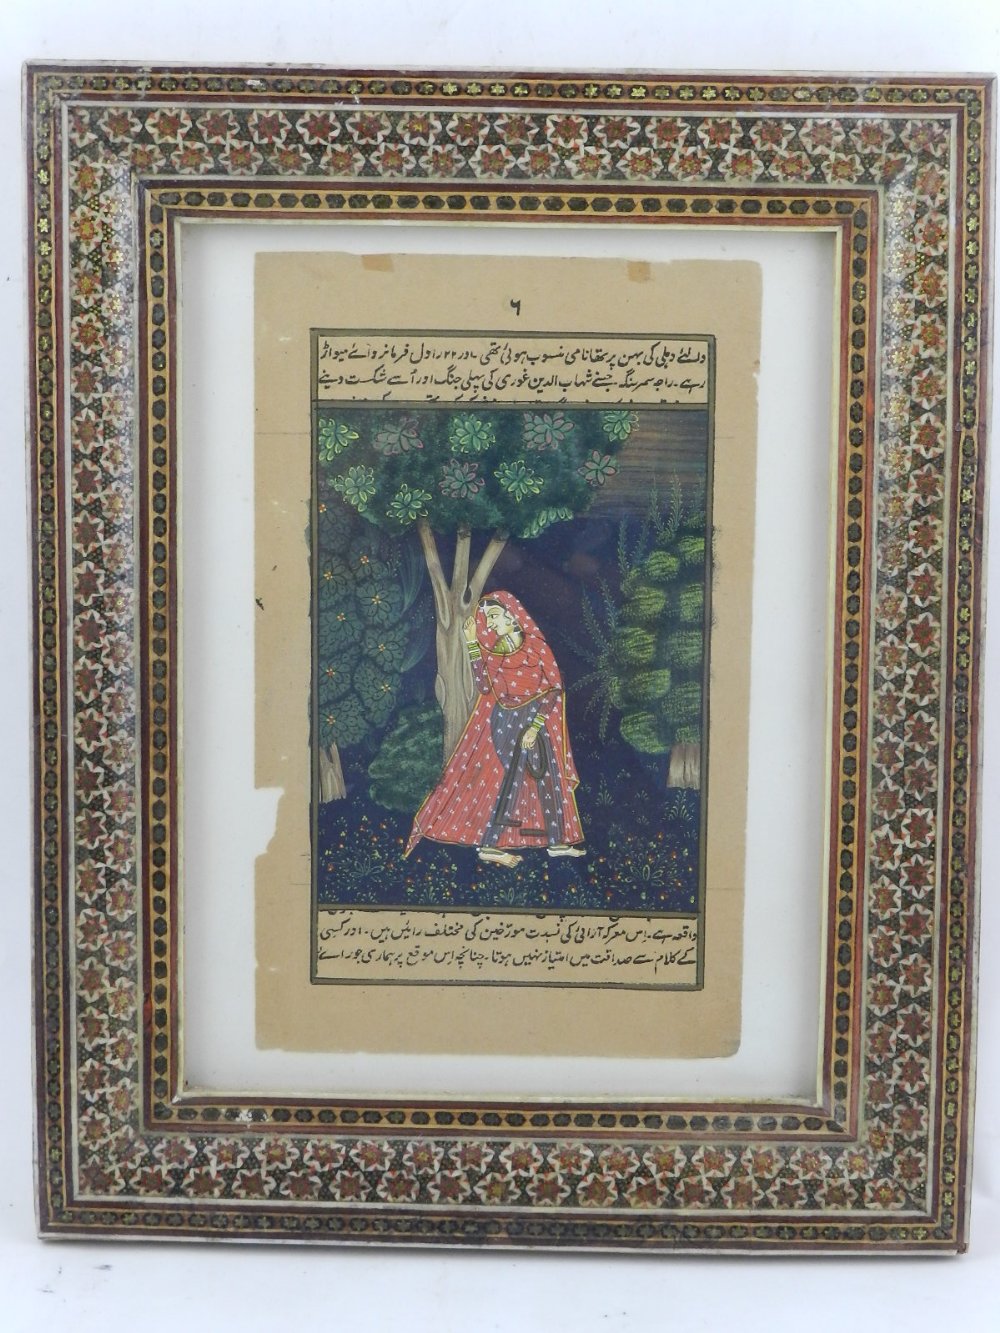 A 20th century Persian watercolour on paper, depicting a woman behind a tree, bears caliagraphy, set